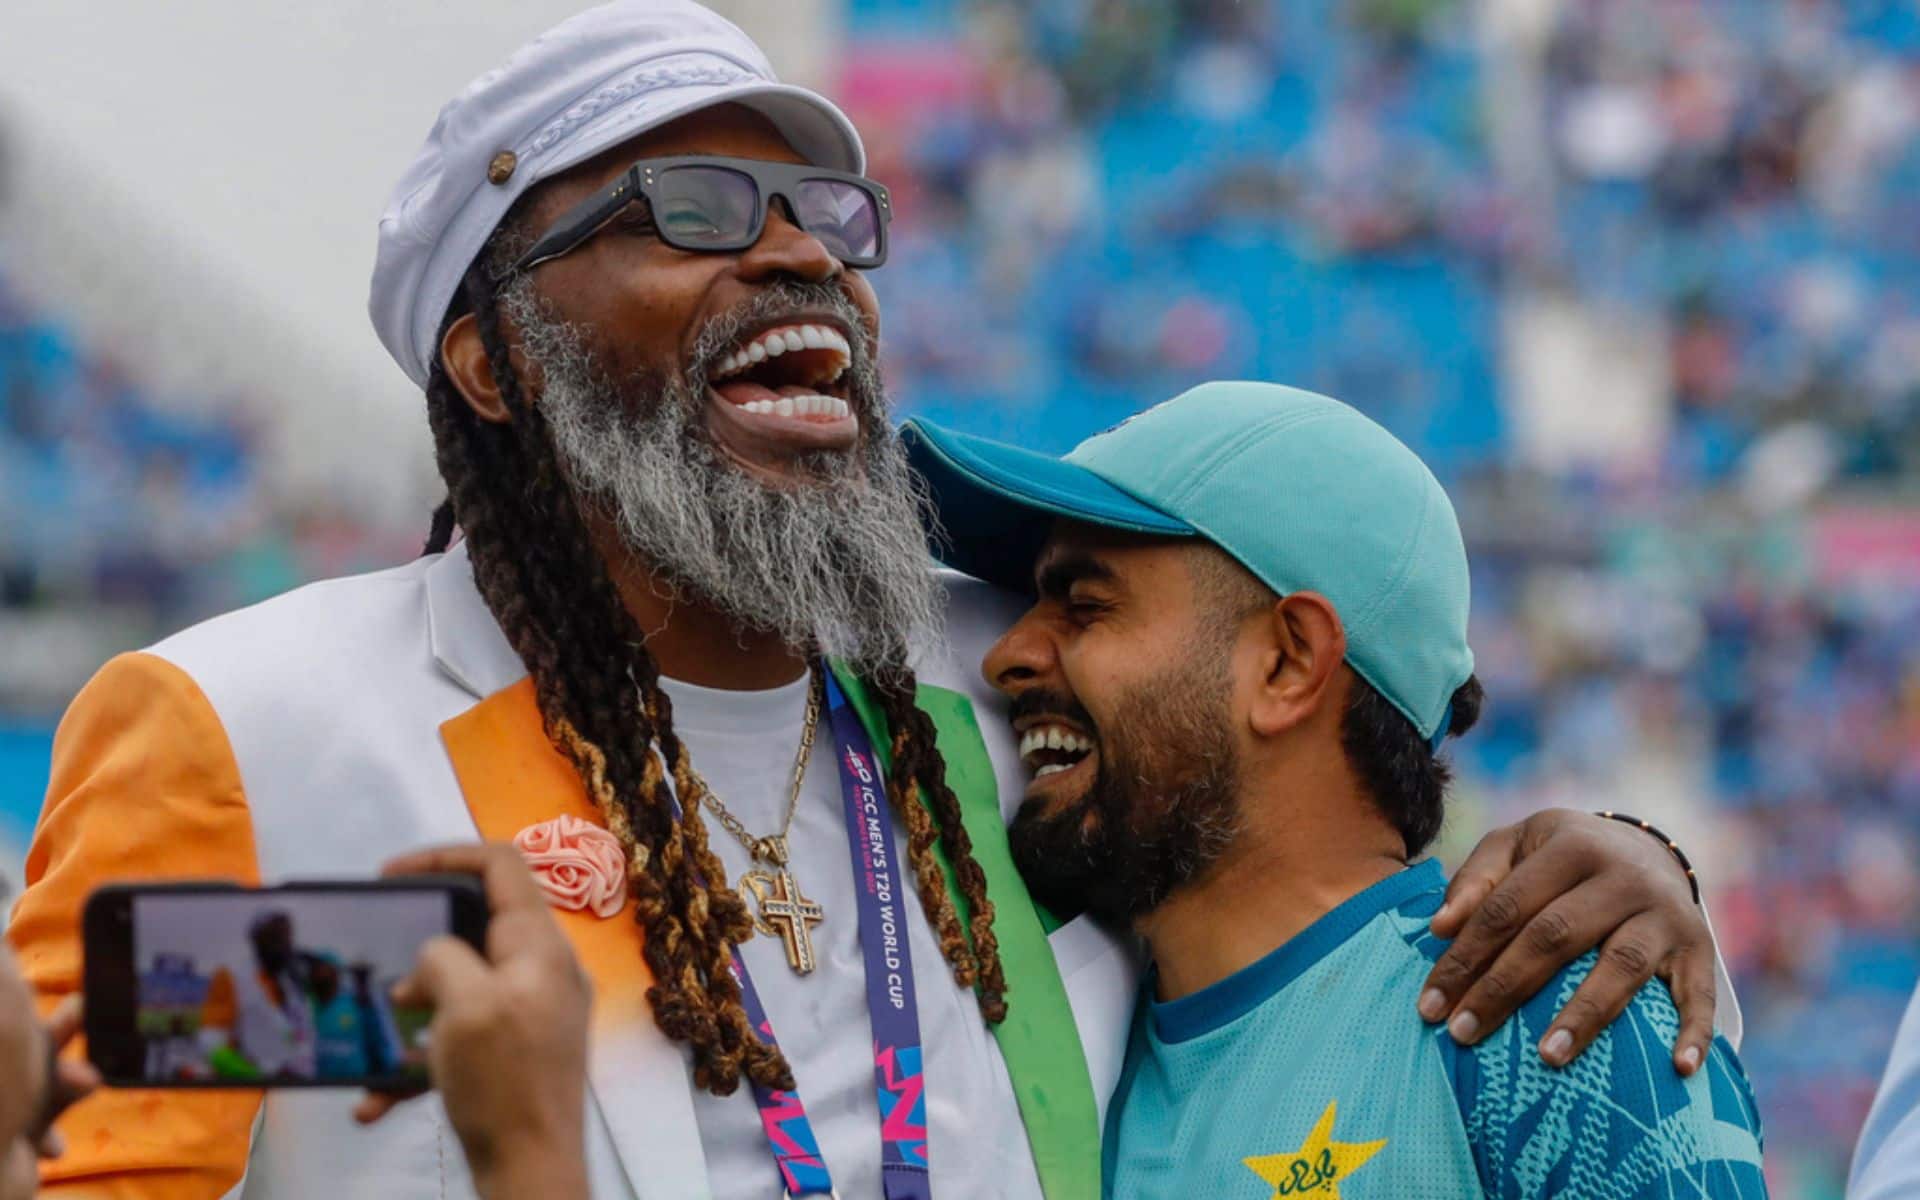 Gayle with Pakistan captain ahead of India clash (AP Photo)